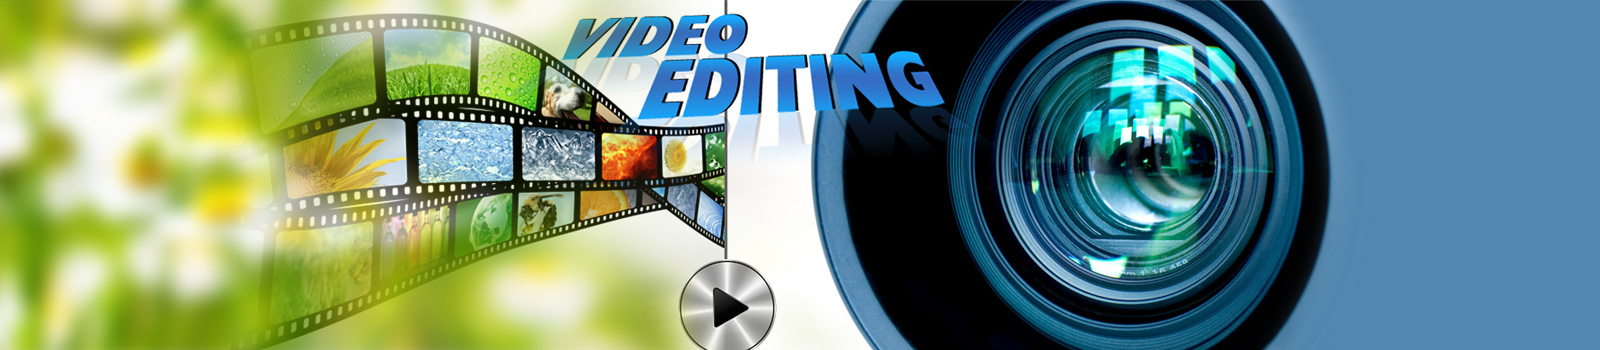 Video Profiling Services